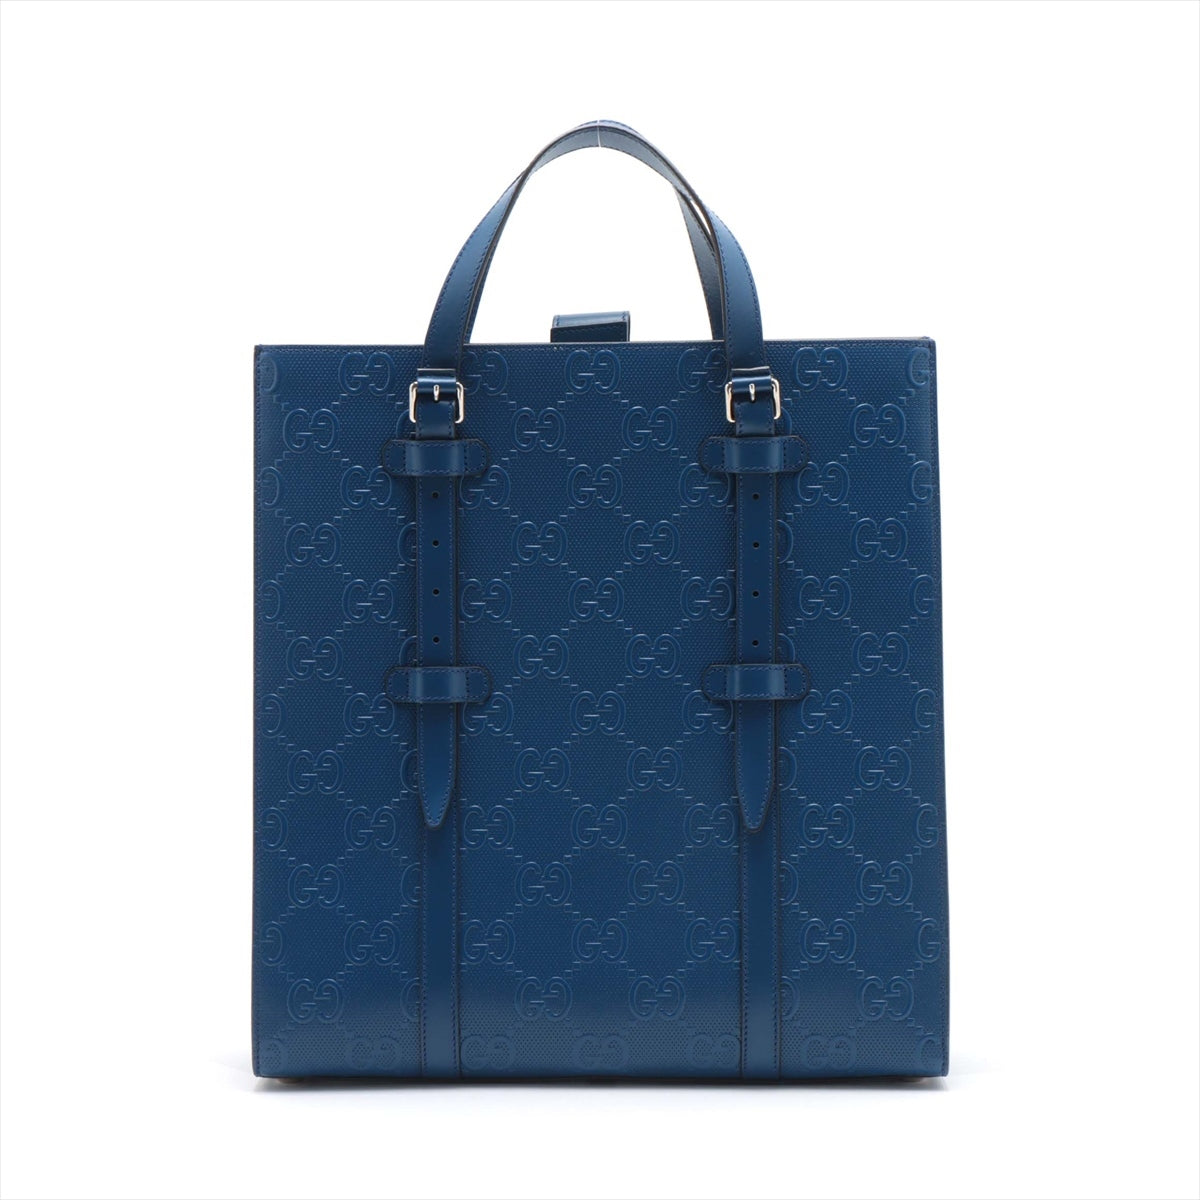 Gucci GG embossed Leather Tote bag Blue 700421